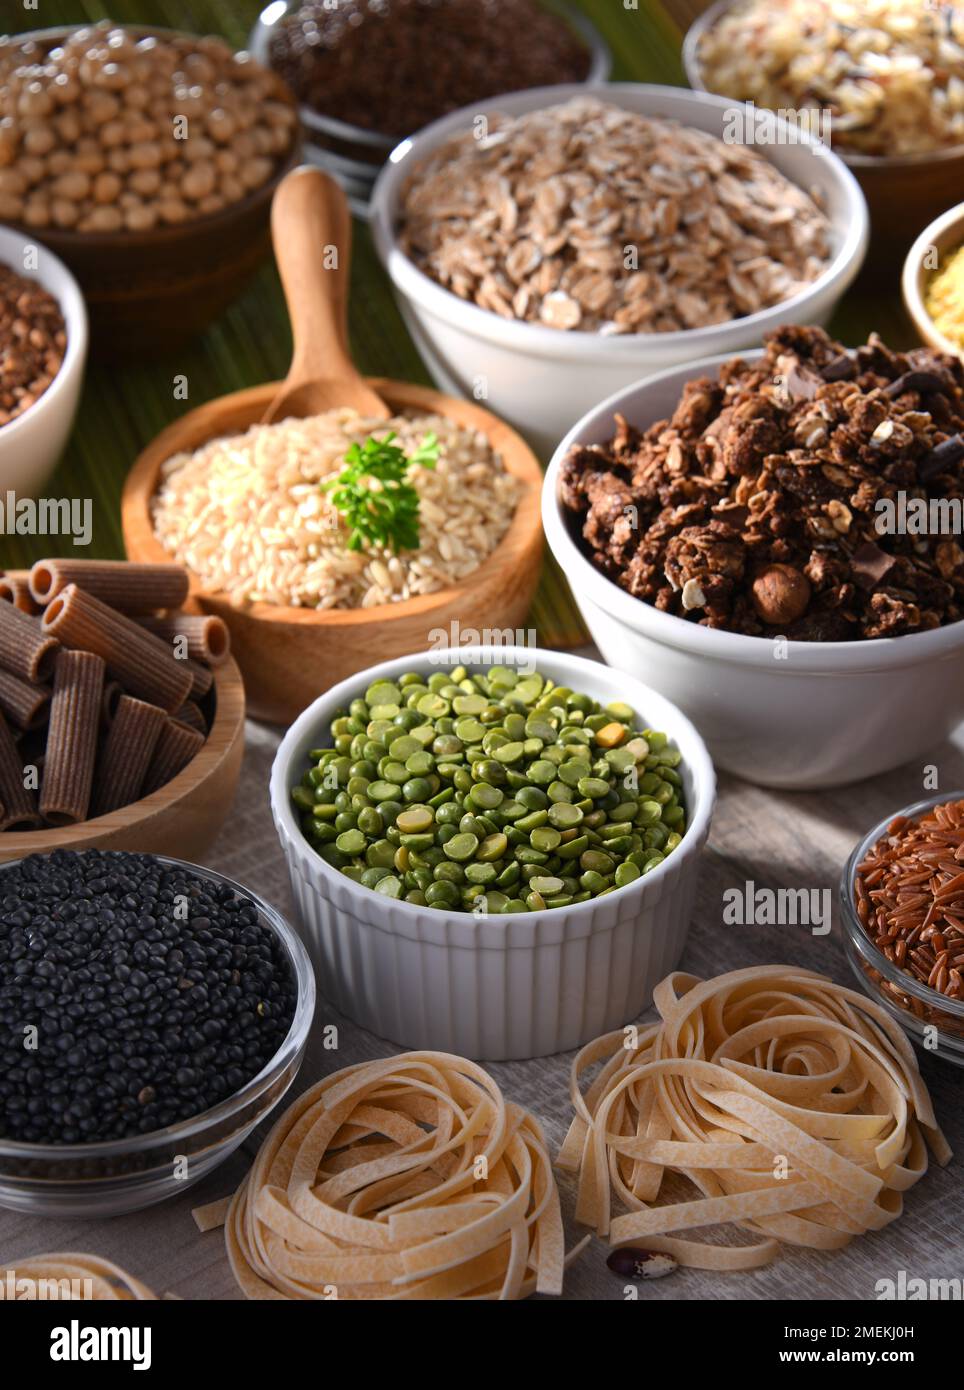 Composition with different kinds of dry food products. Stock Photo